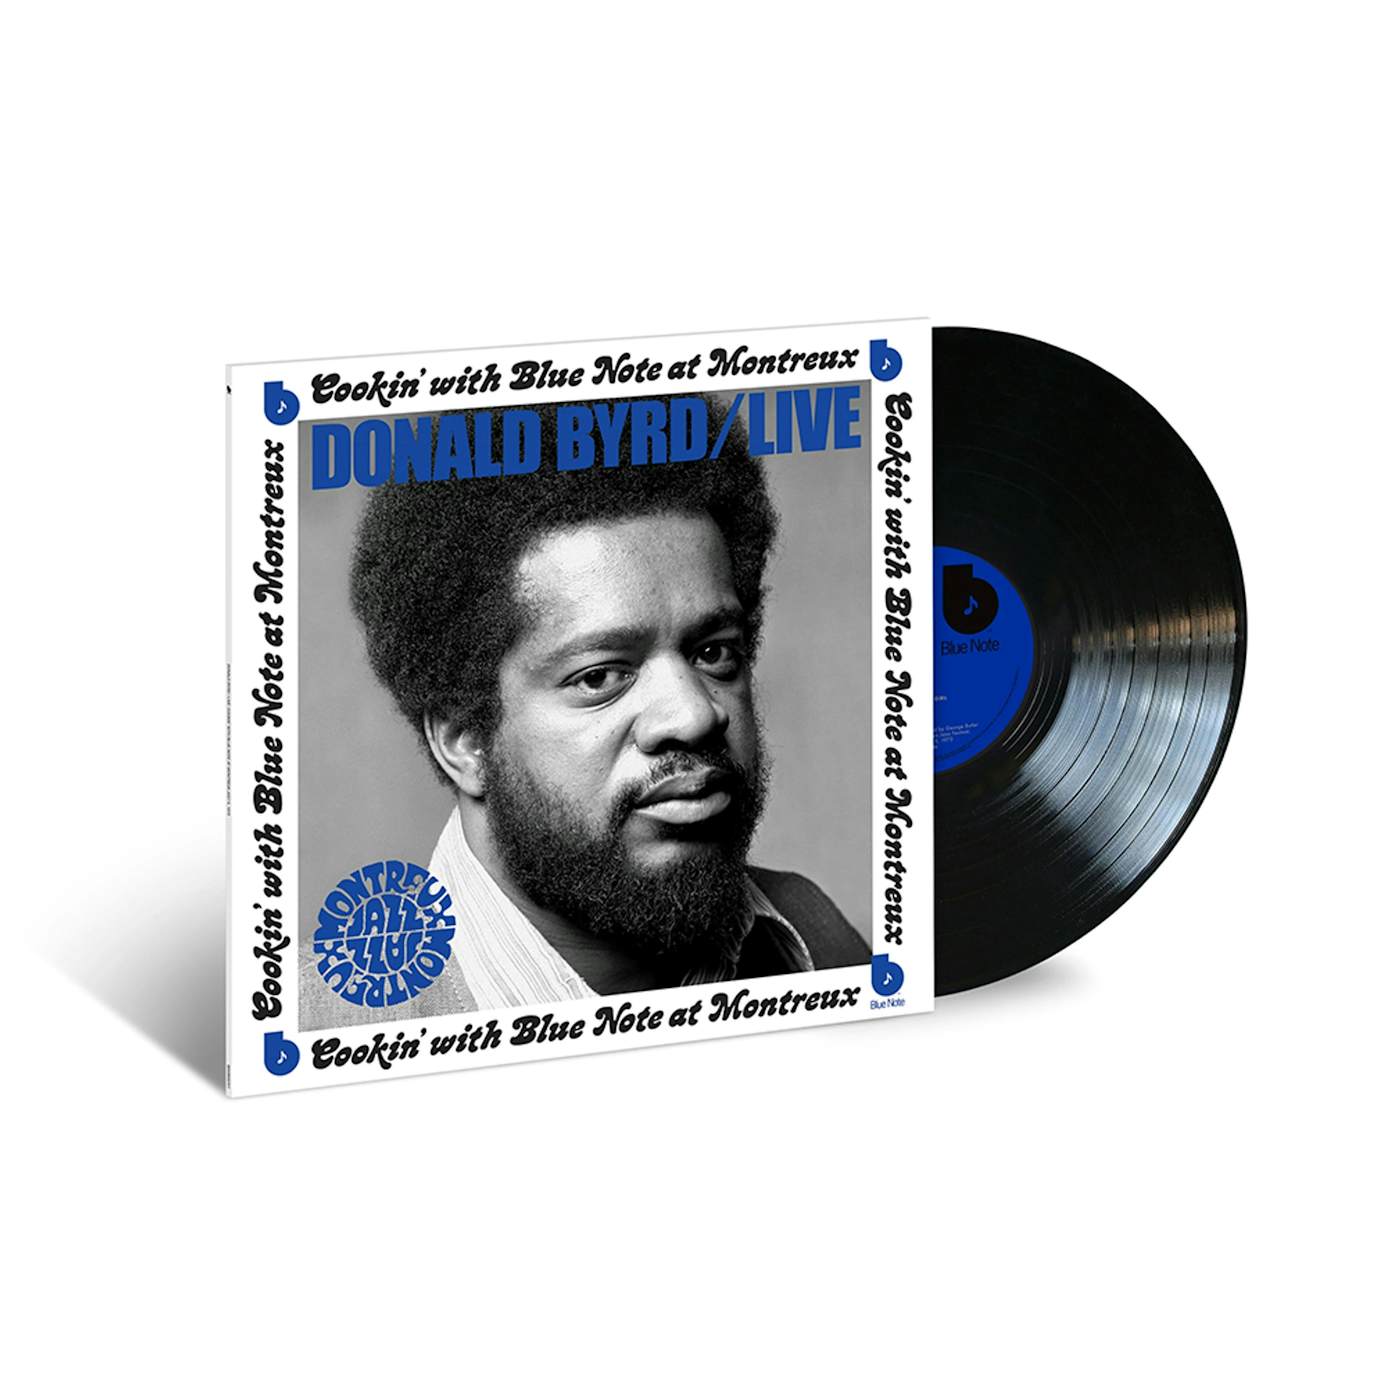 Donald Byrd - Live: Cookin' With Blue Note At Montreux (Vinyl)